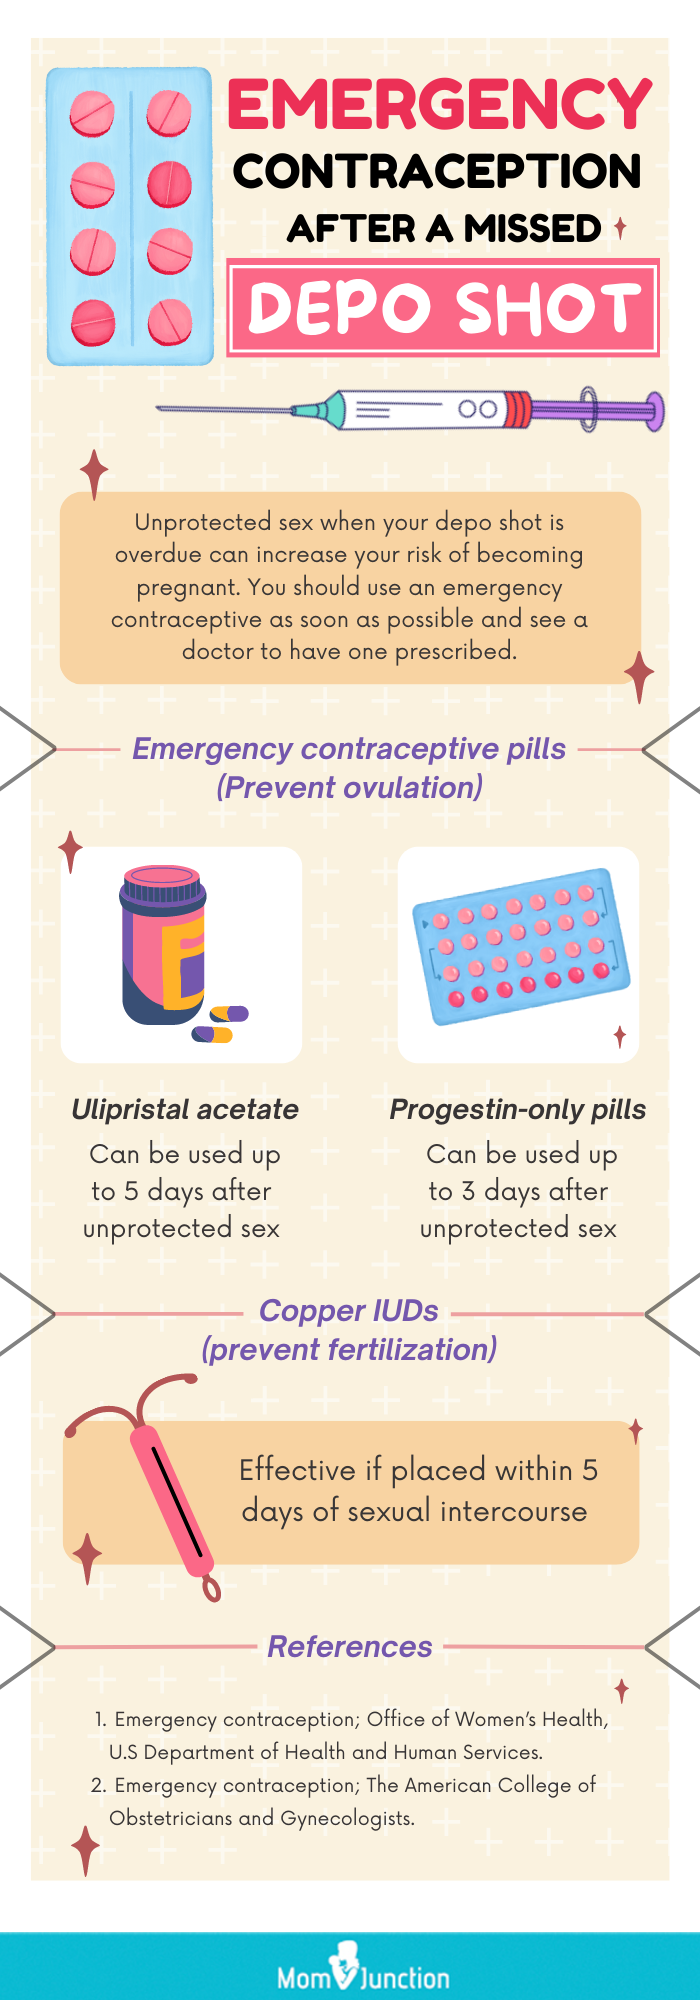 emergency contraception after a missed depo shot (infographic)